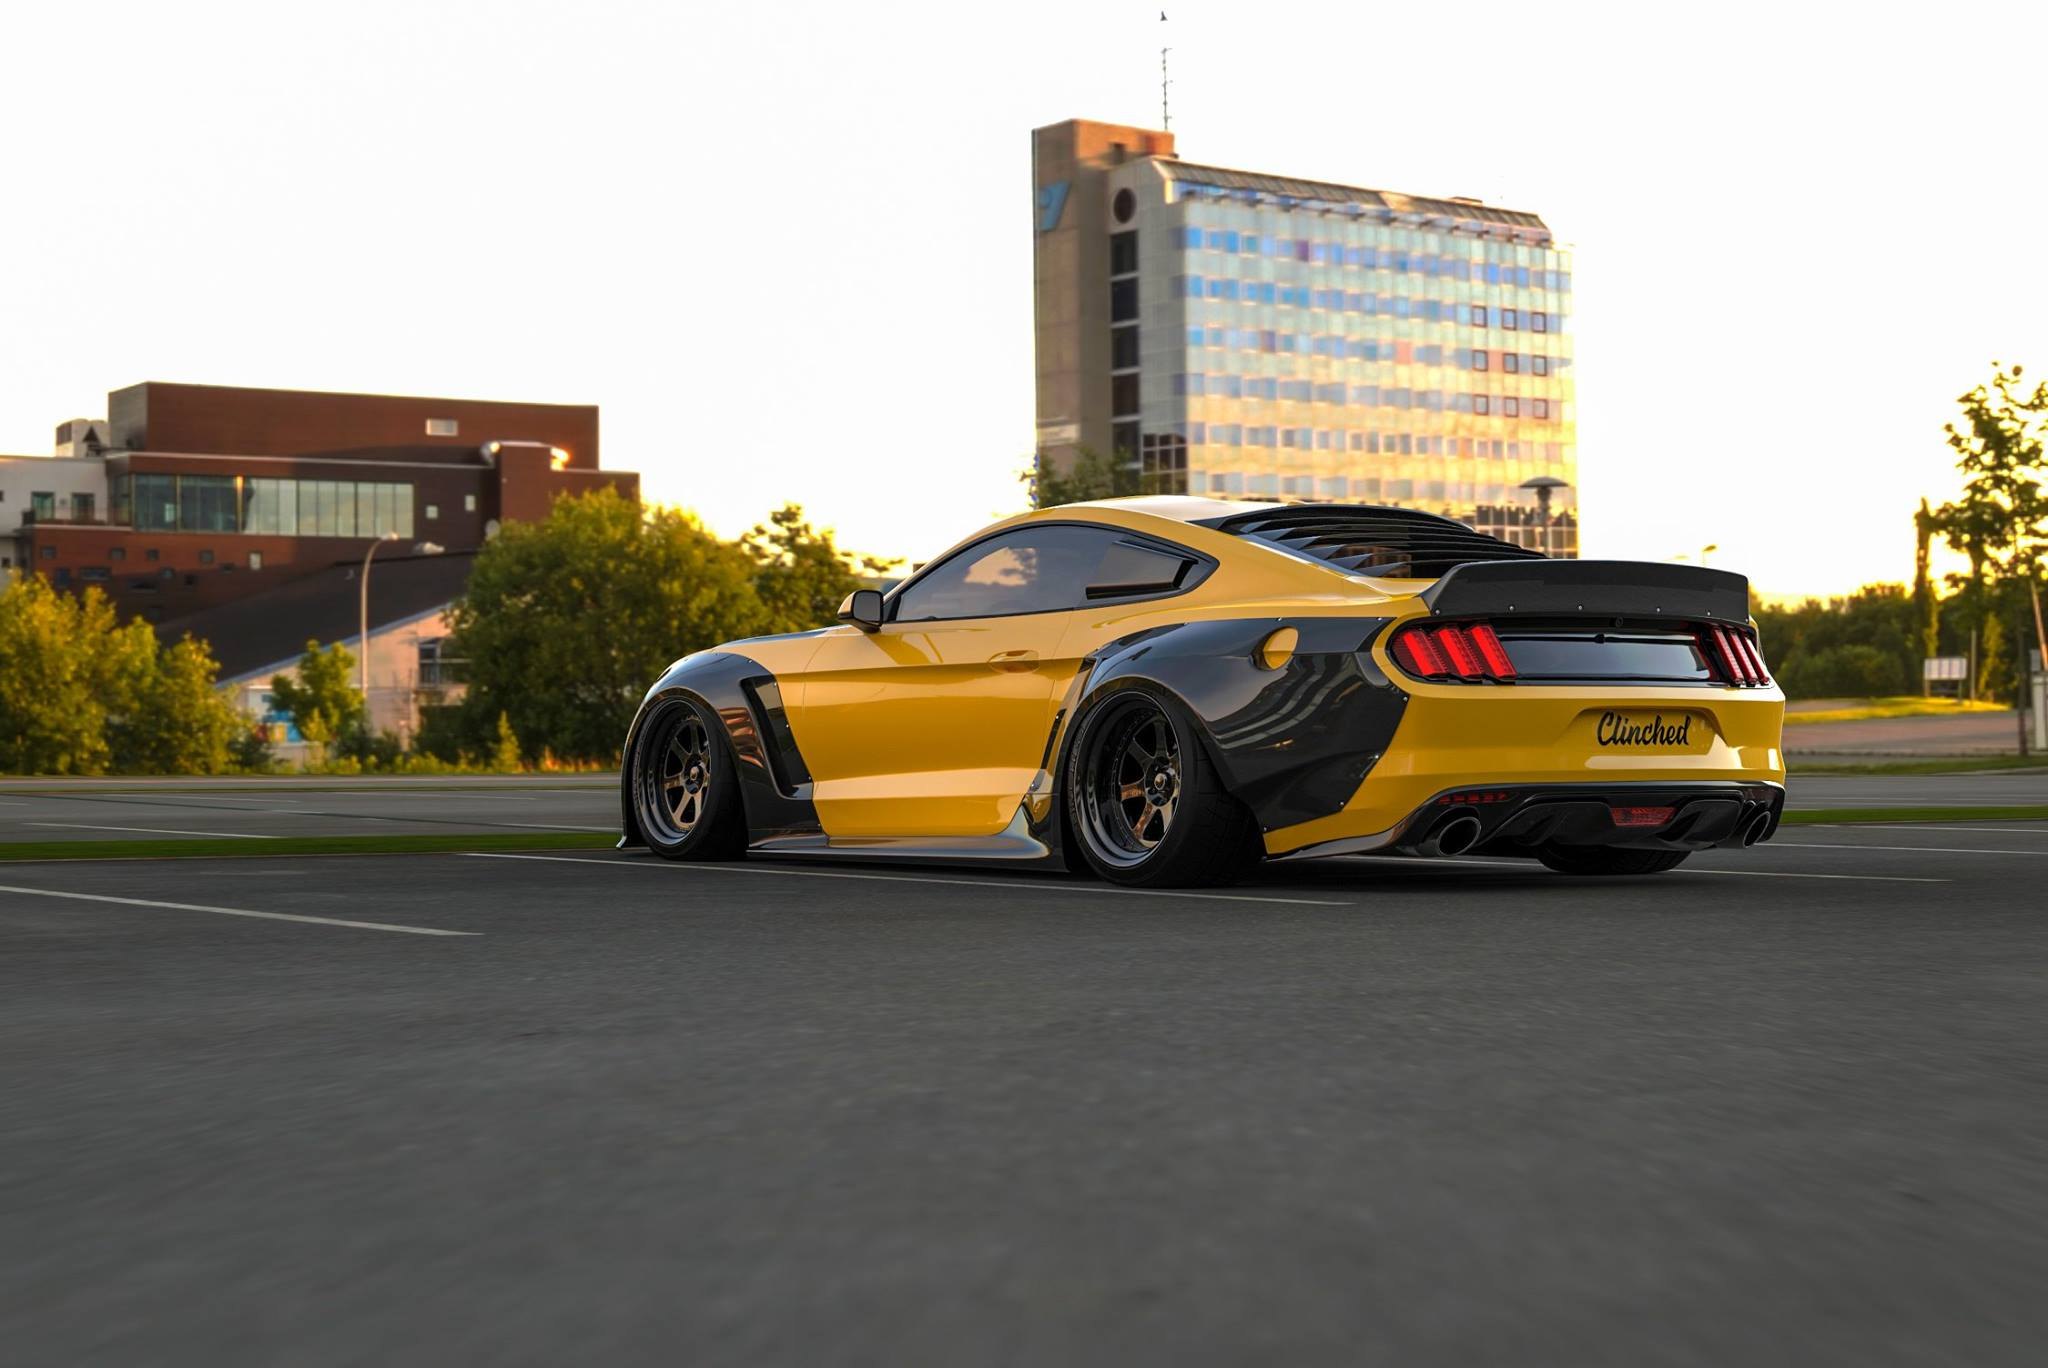 Custom Black Wheels on Yellow Ford Mustang - Photo by Clinched